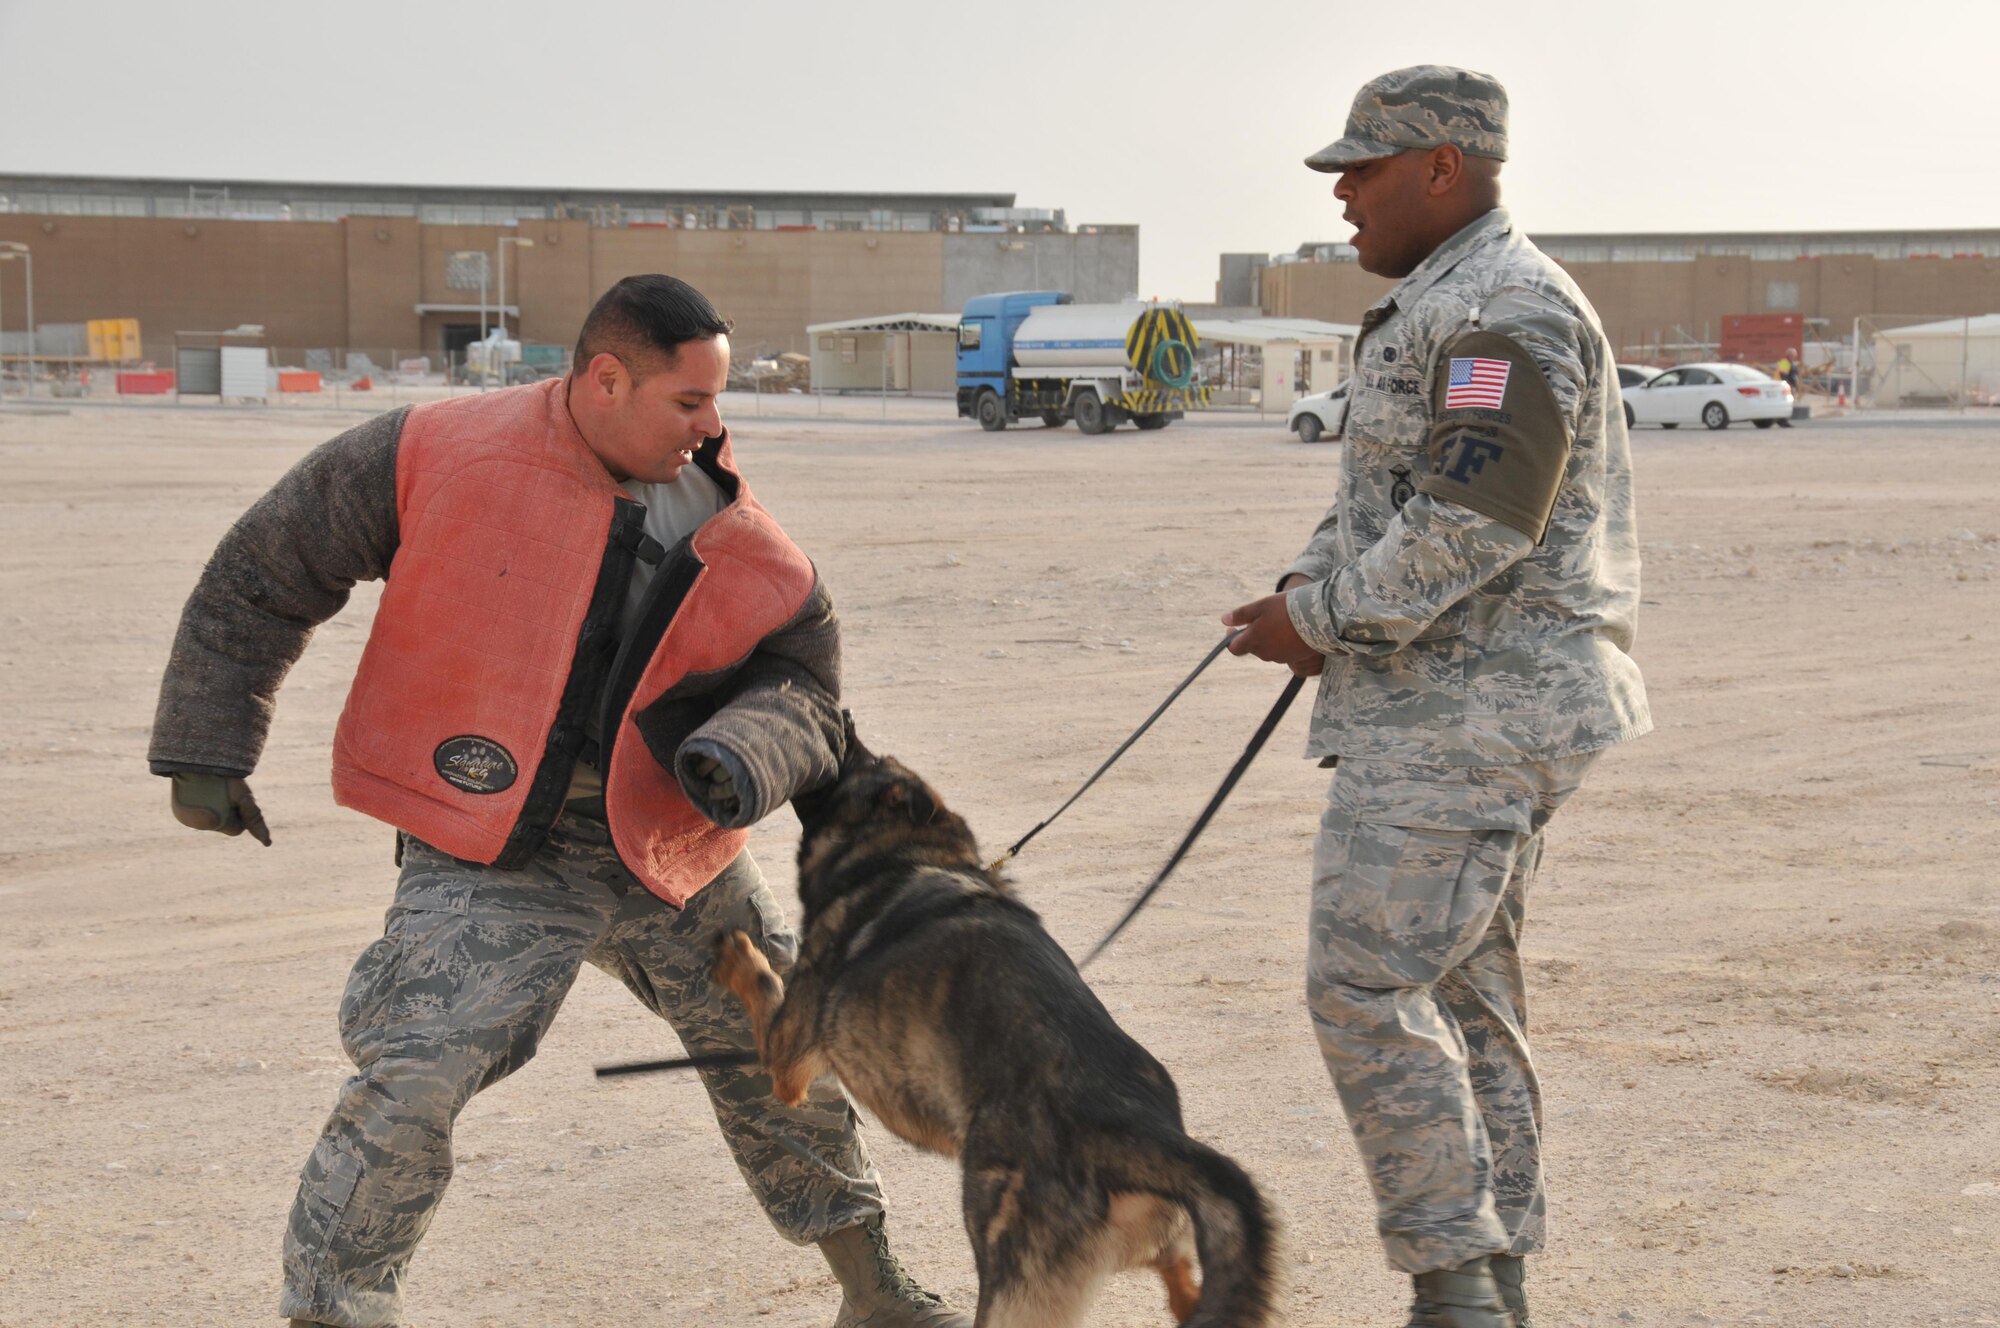 Tech. Sgt. Max Soto (left), 379th Expeditionary Security Forces Squadron military working dog trainer and Staff Sgt. Jahmal Hardy (right), 379 ESFS MWD handler, along with Nero, Hardy’s partner, practice patrol training Jan. 27 at Al Udeid Air Base Qatar. In this training scenario, Soto plays the role of a suspicious suspect attempting to escape and Nero must stop him. (U.S. Air Force photo by Tech. Sgt. Terrica Y. Jones/Released)